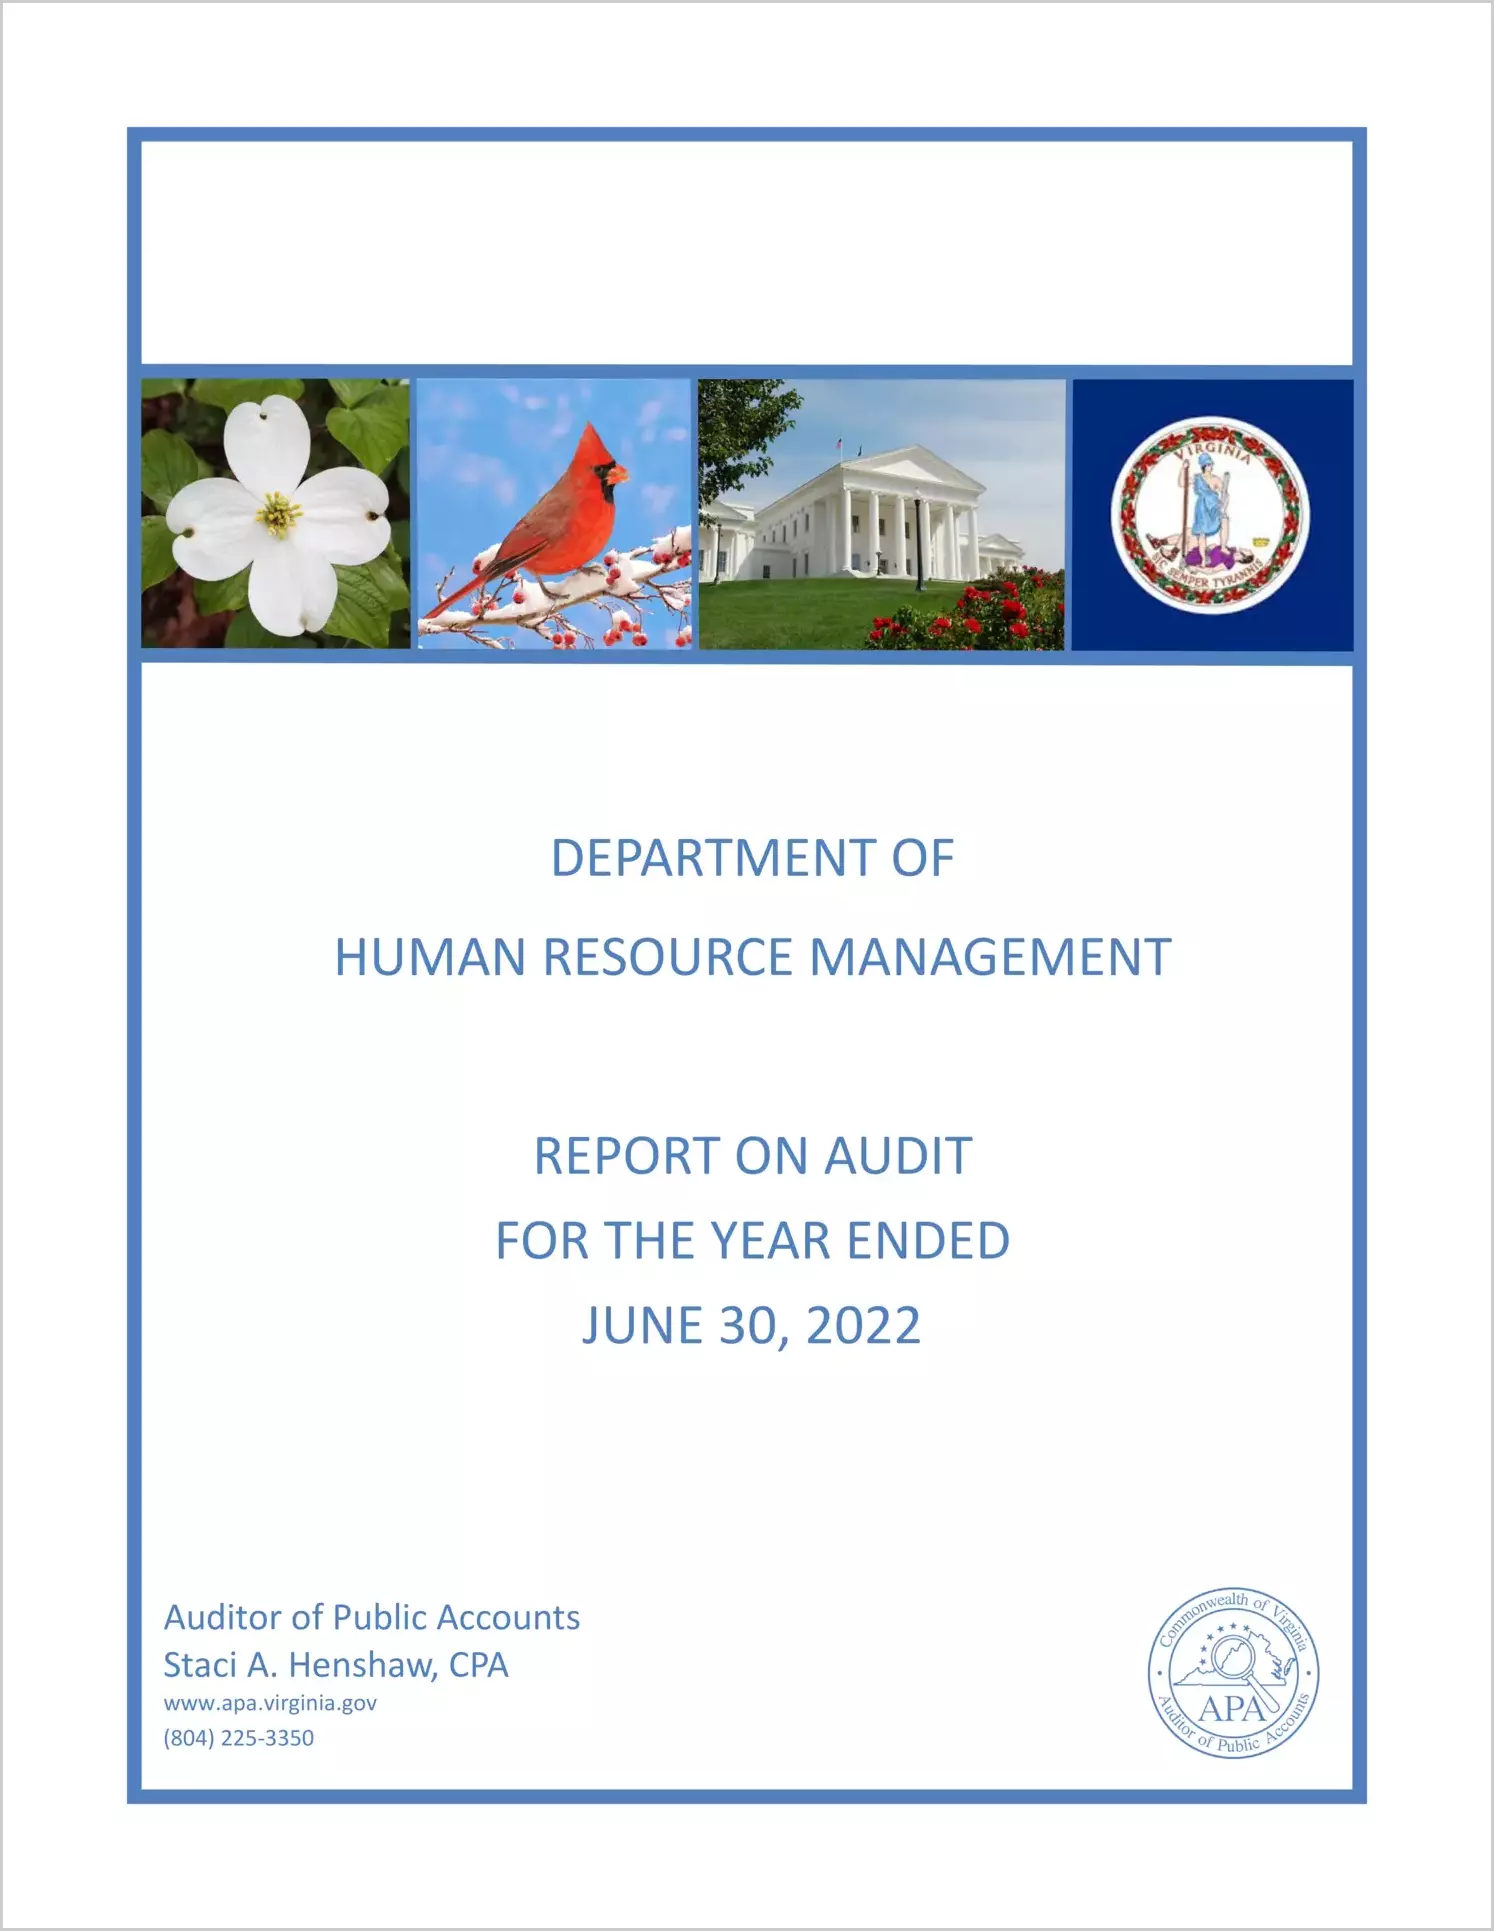 Department of Human Resource Management for the year ended June 30, 2022